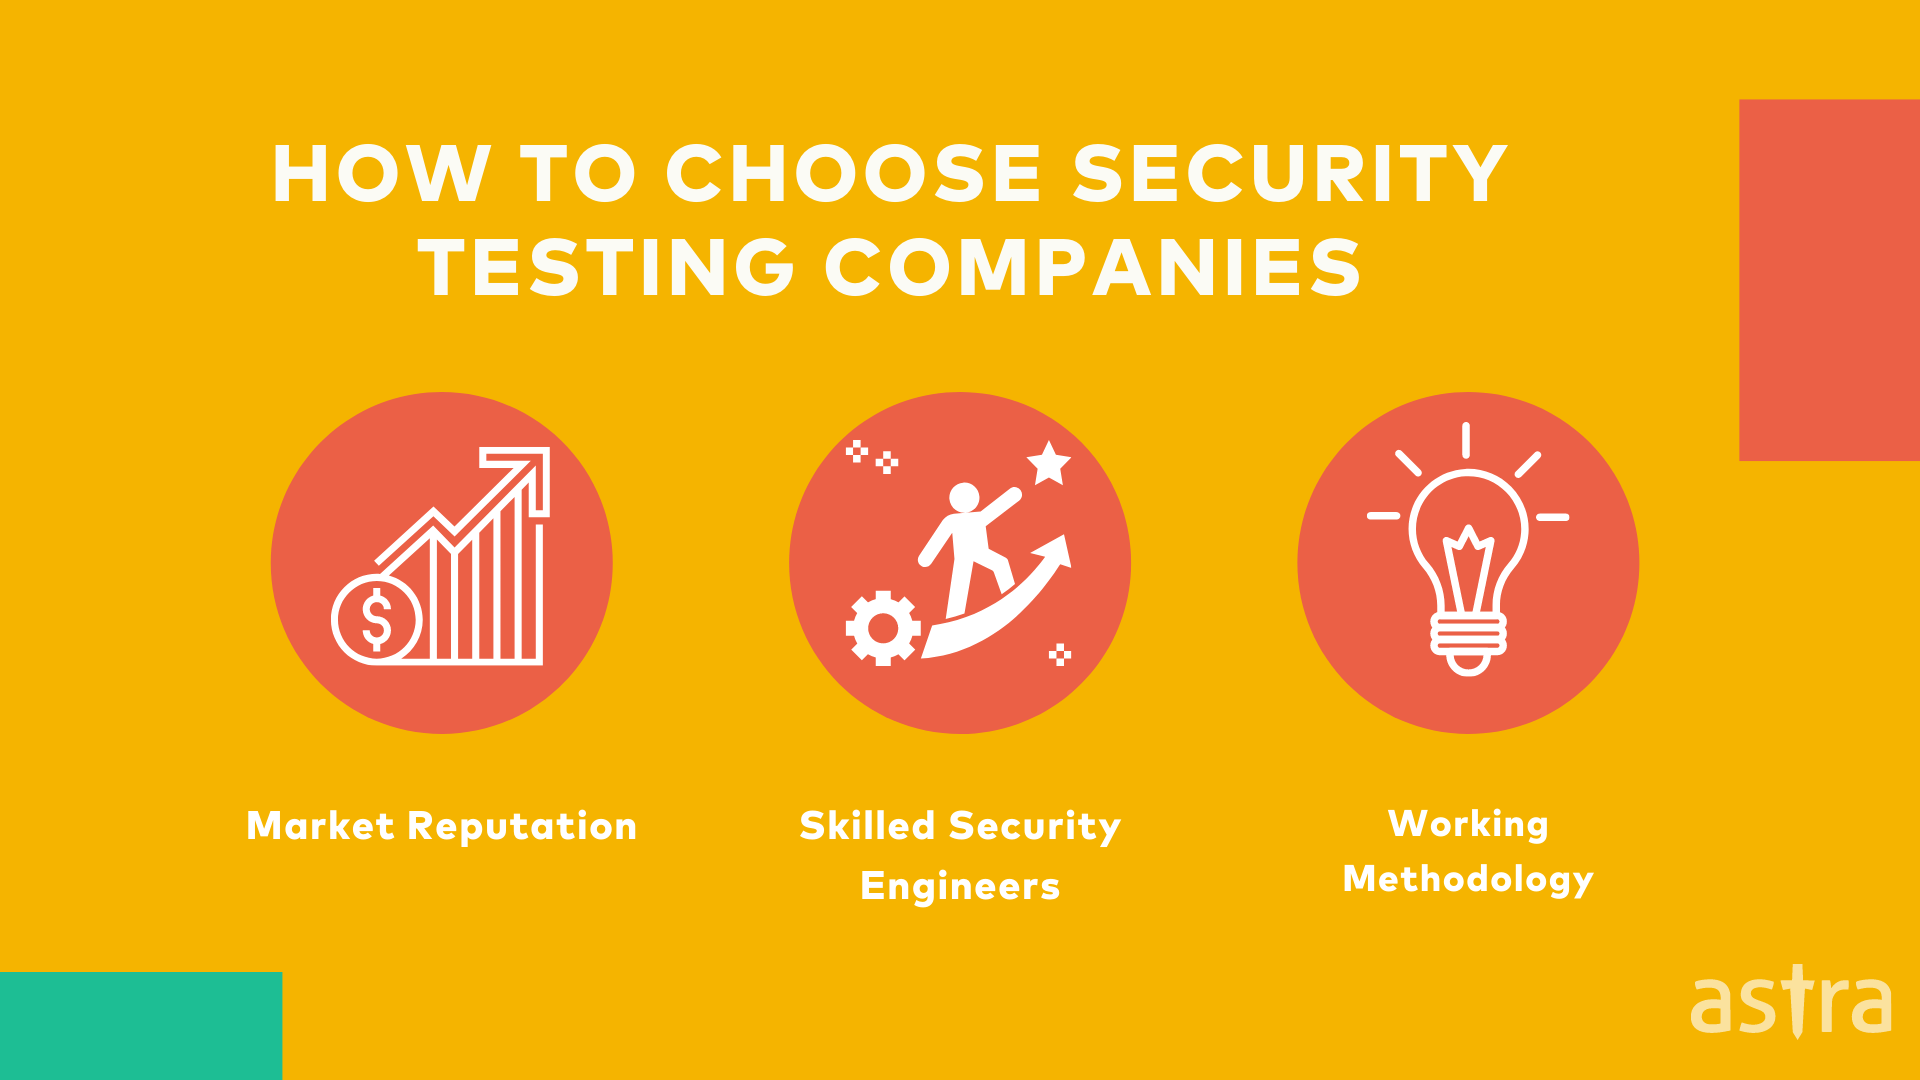 How to choose security testing companies?